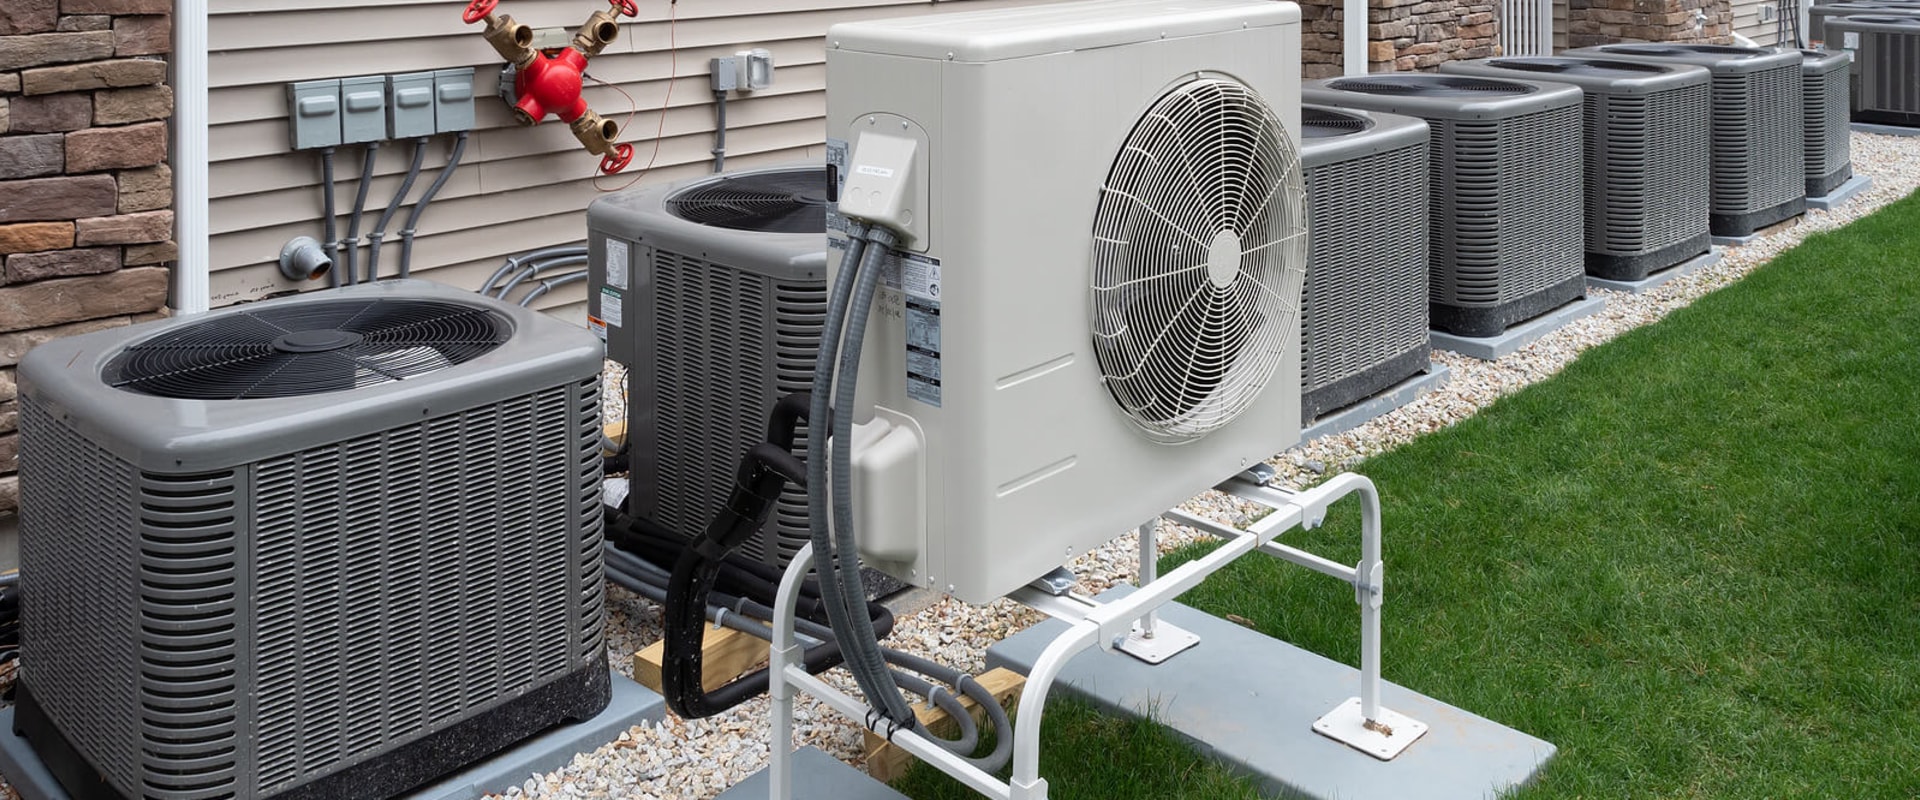 What are the pros and cons of a ductless air conditioner?